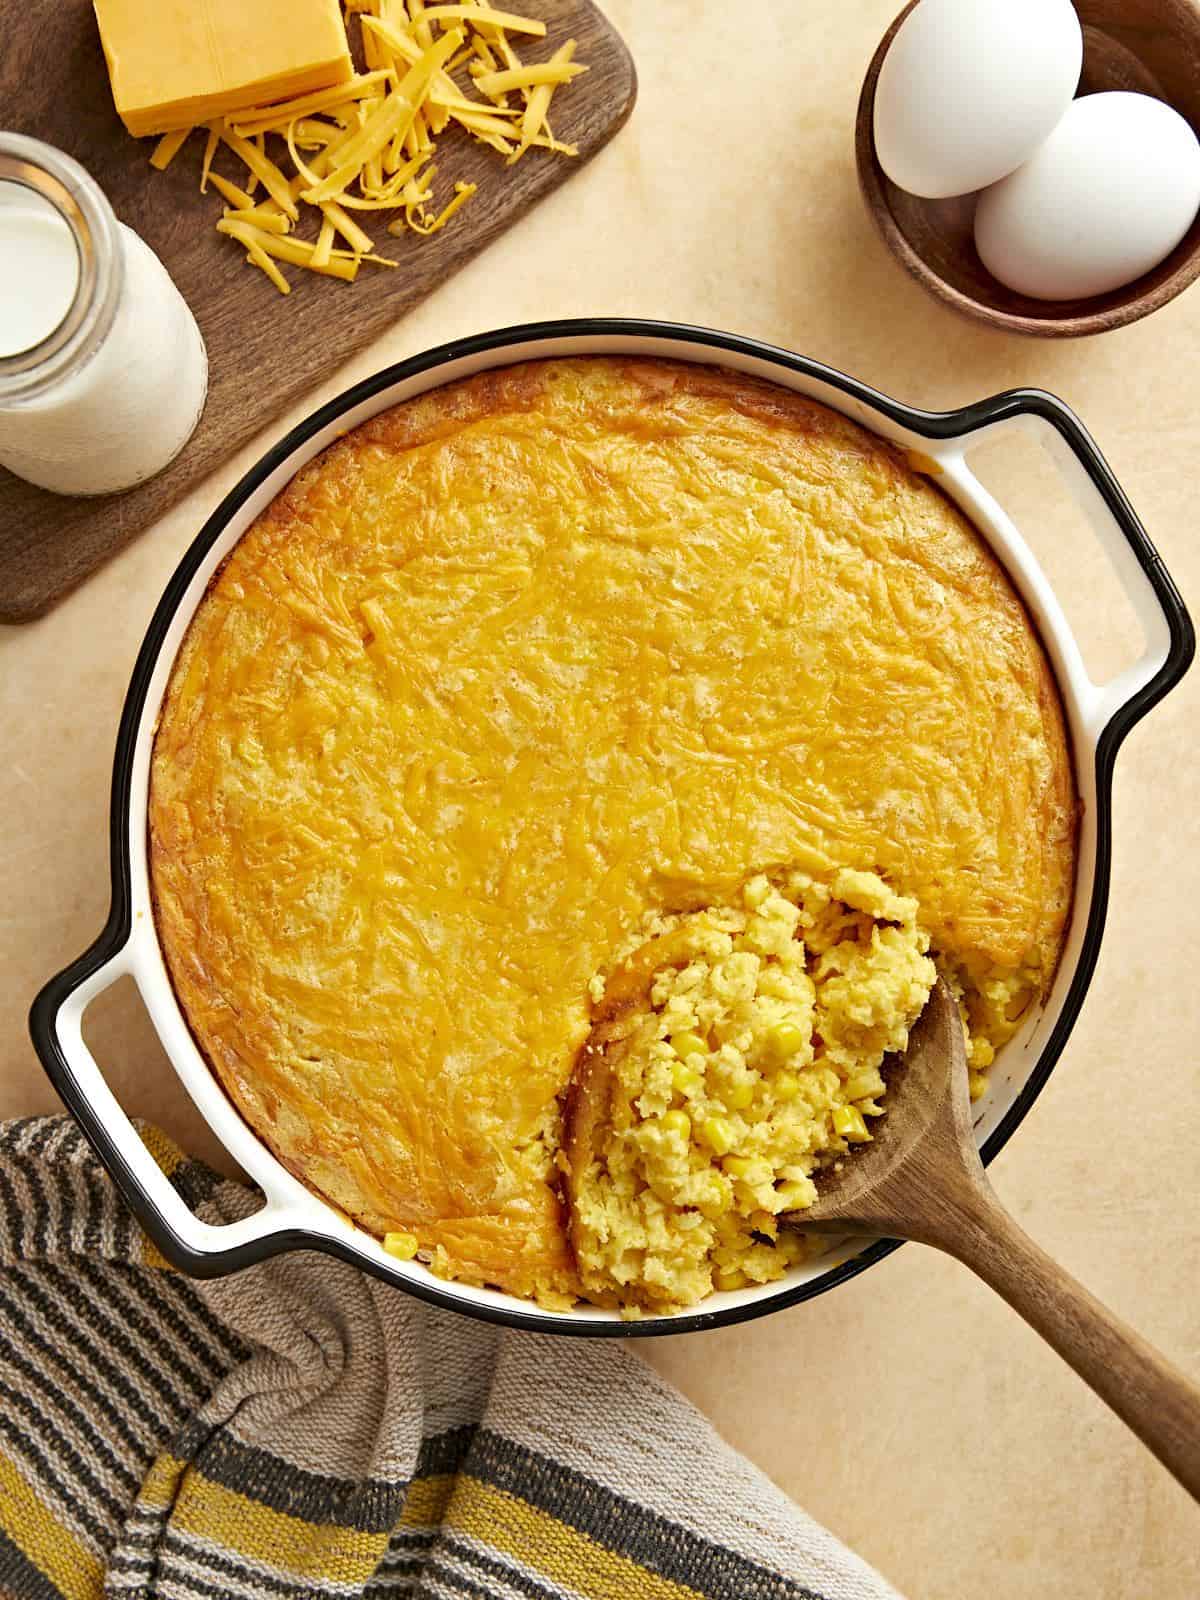 Overhead view of corn pudding being scooped out of the casserole dish with ingredients on the sides.